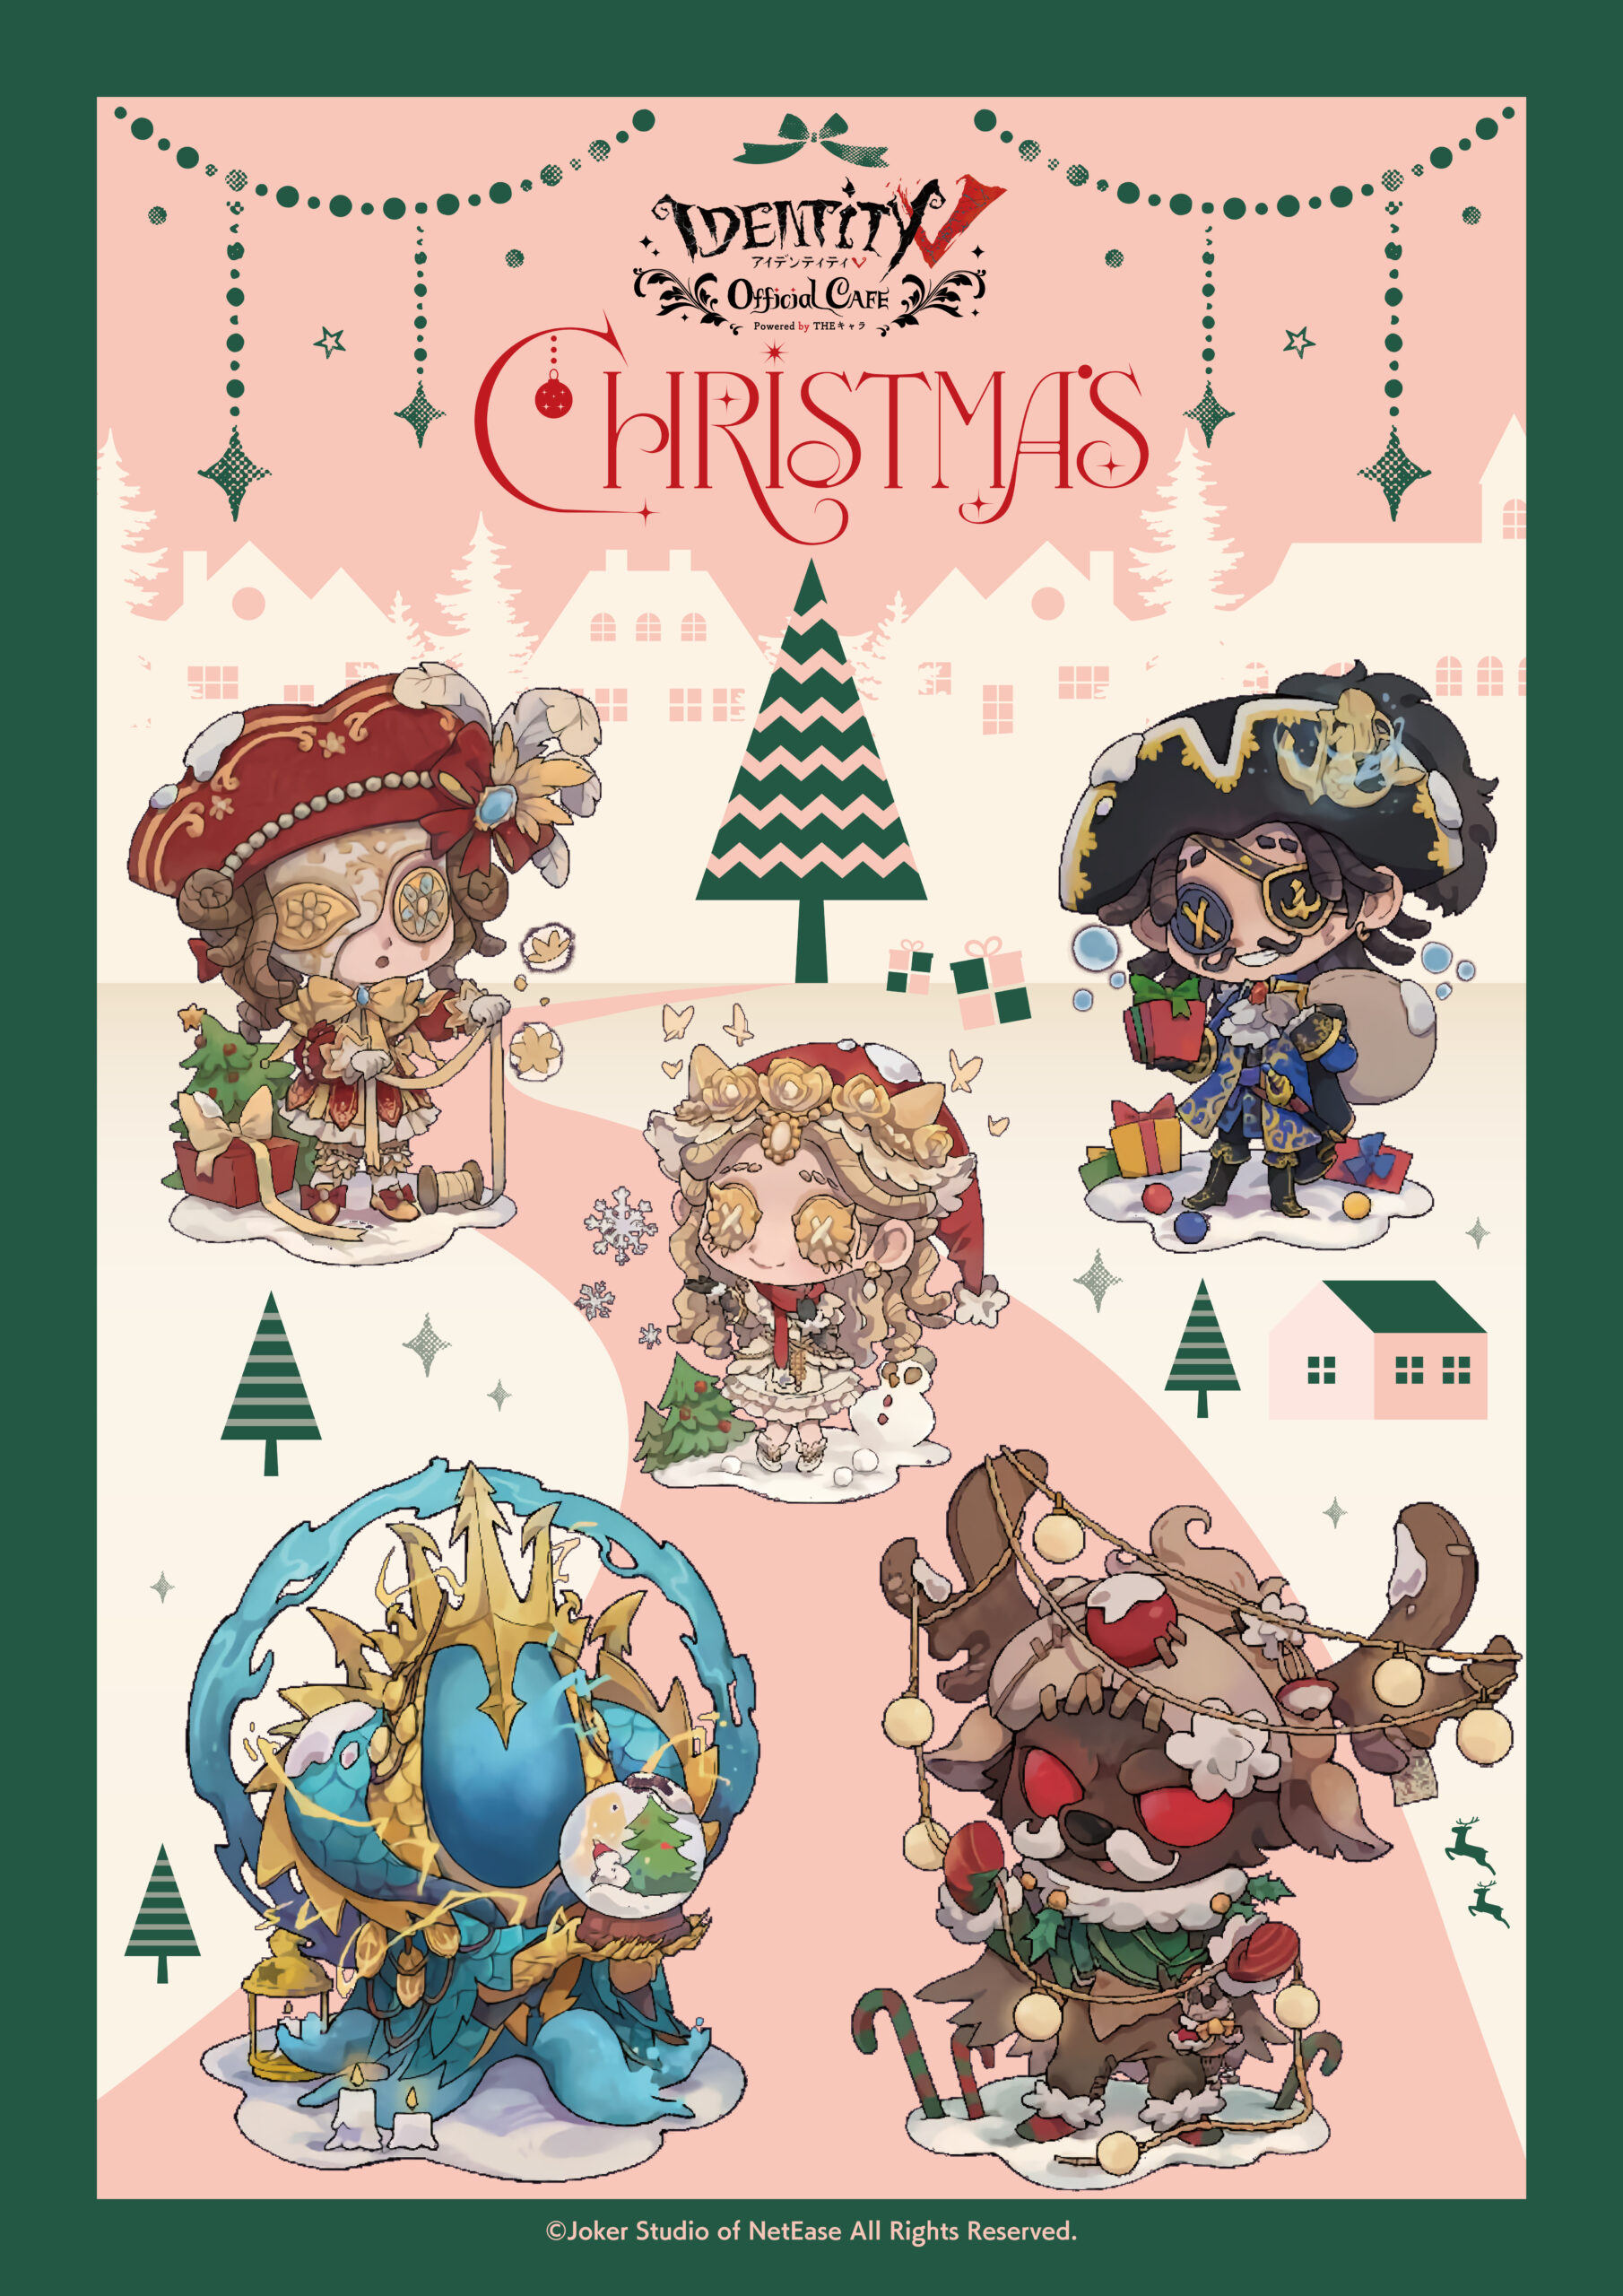 IdentityV 第五人格 Official CAFE ～Christmas～ | 【THEキャラ 